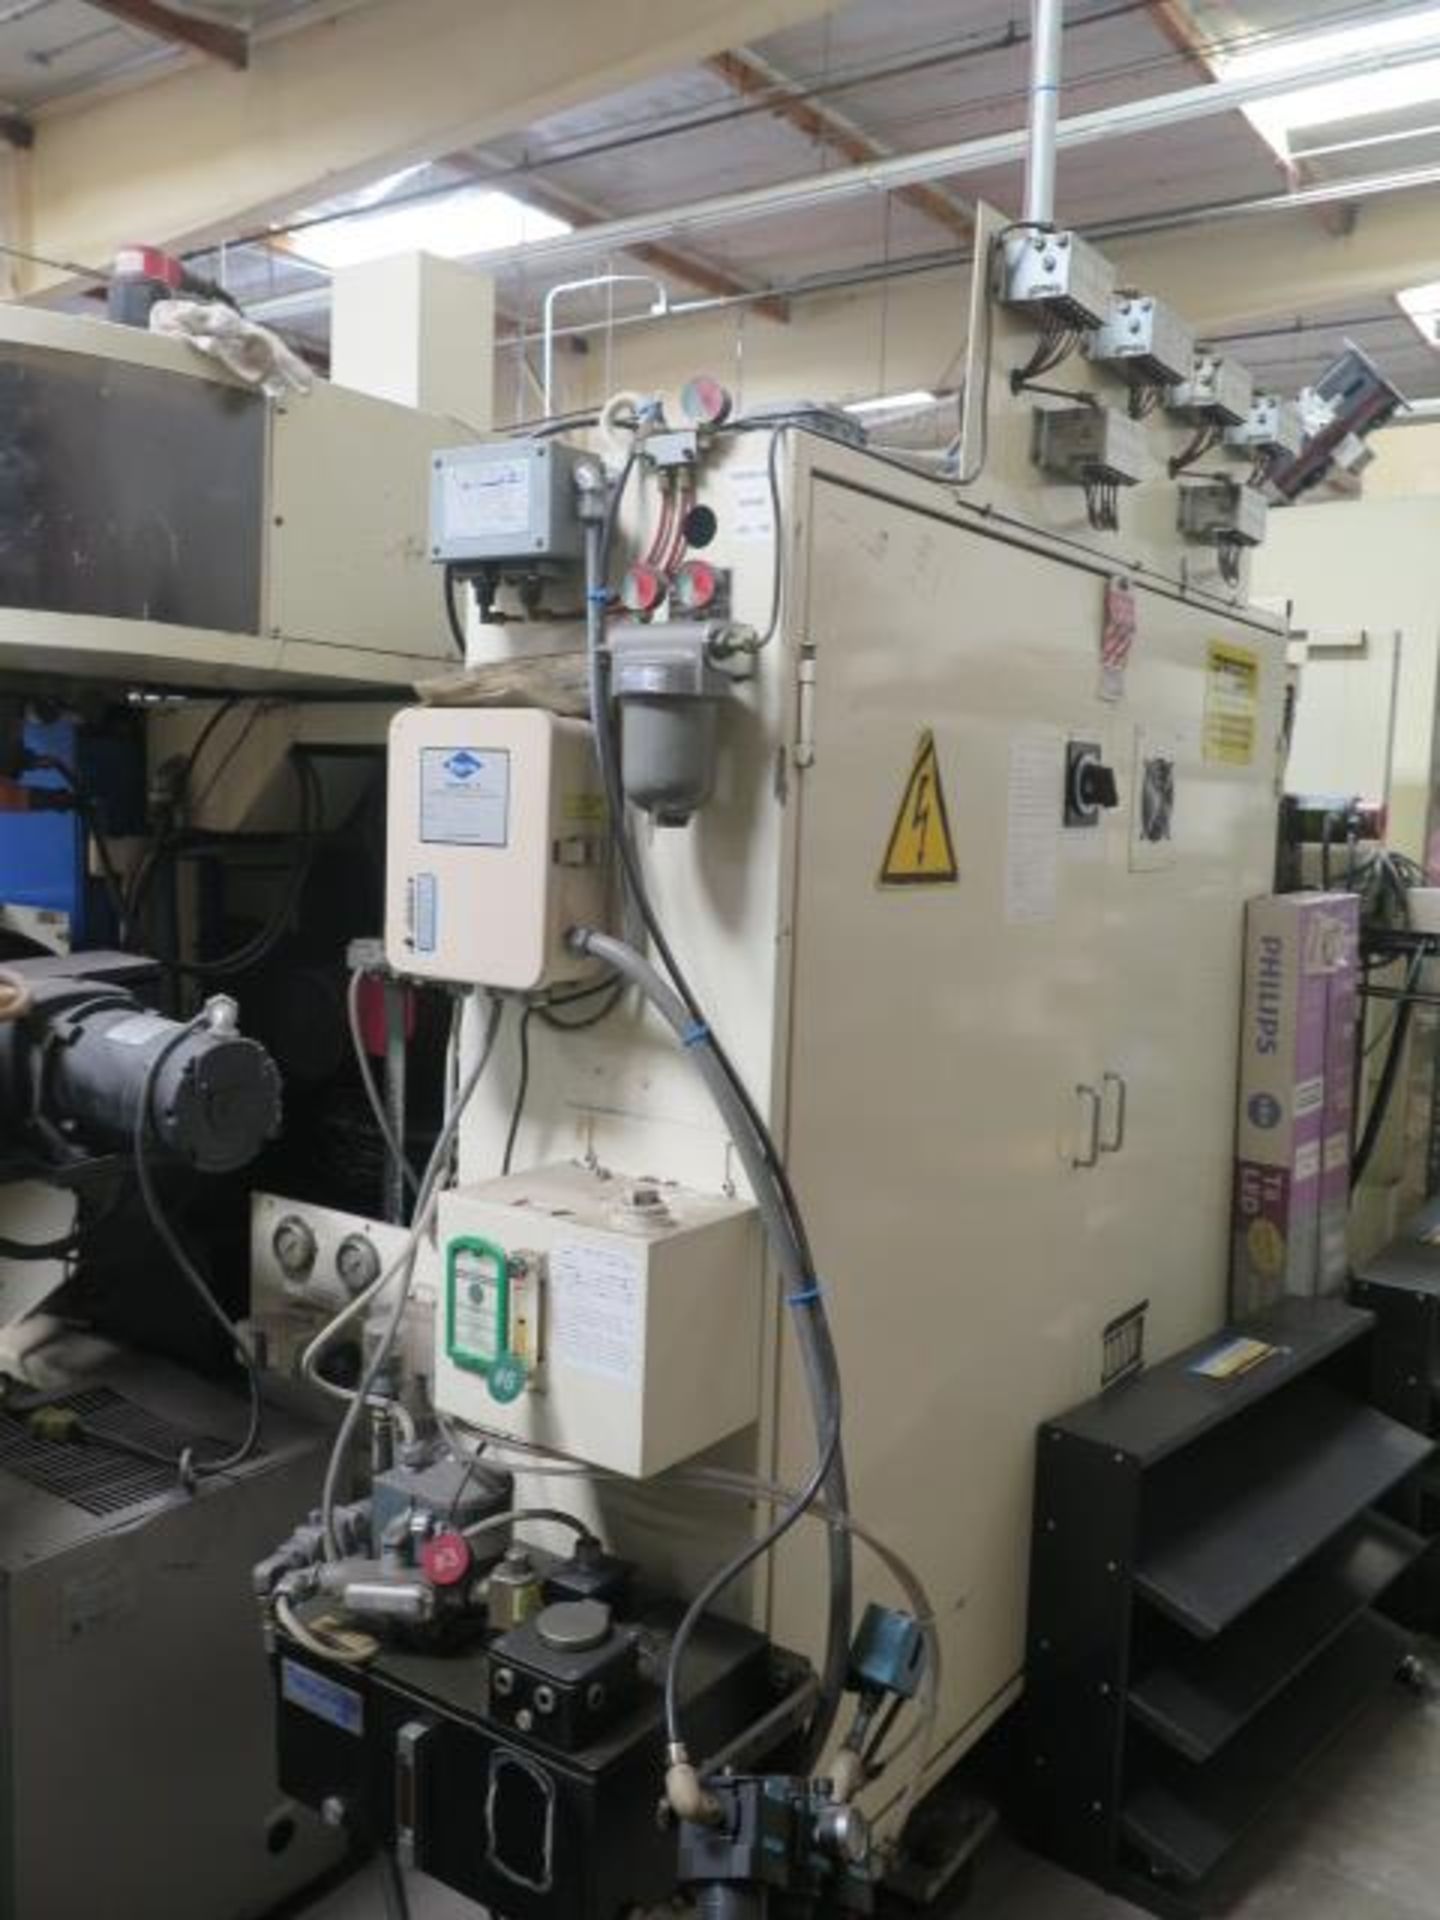 Tsugami MS3.10P Type MA3H 4-Axis 10-Pallet CNC HMC (HAS X-AXIS PROBLEM), SOLD AS IS - Image 17 of 20